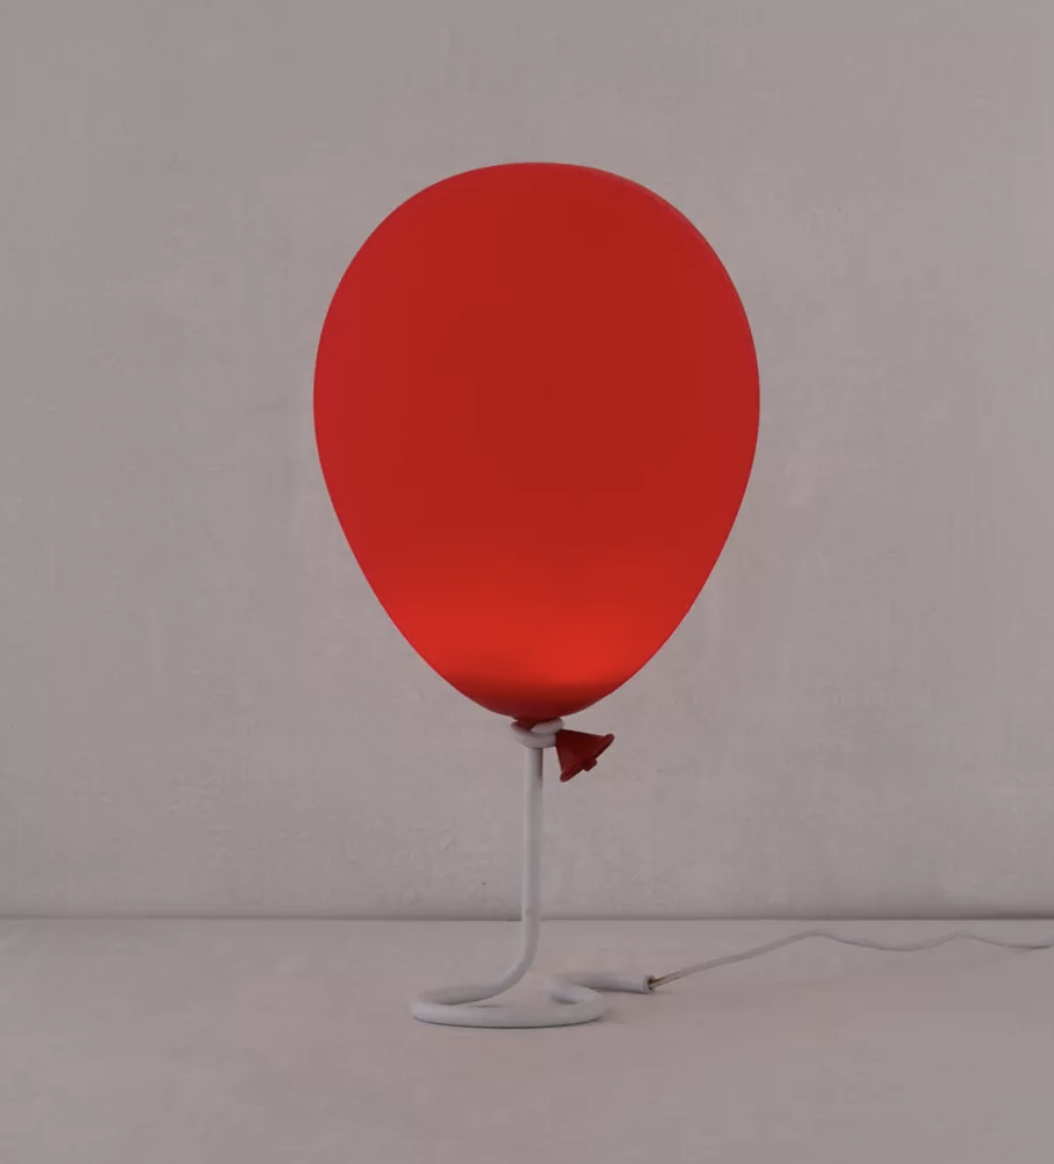 the red balloon lamp on a table in front of a plain background